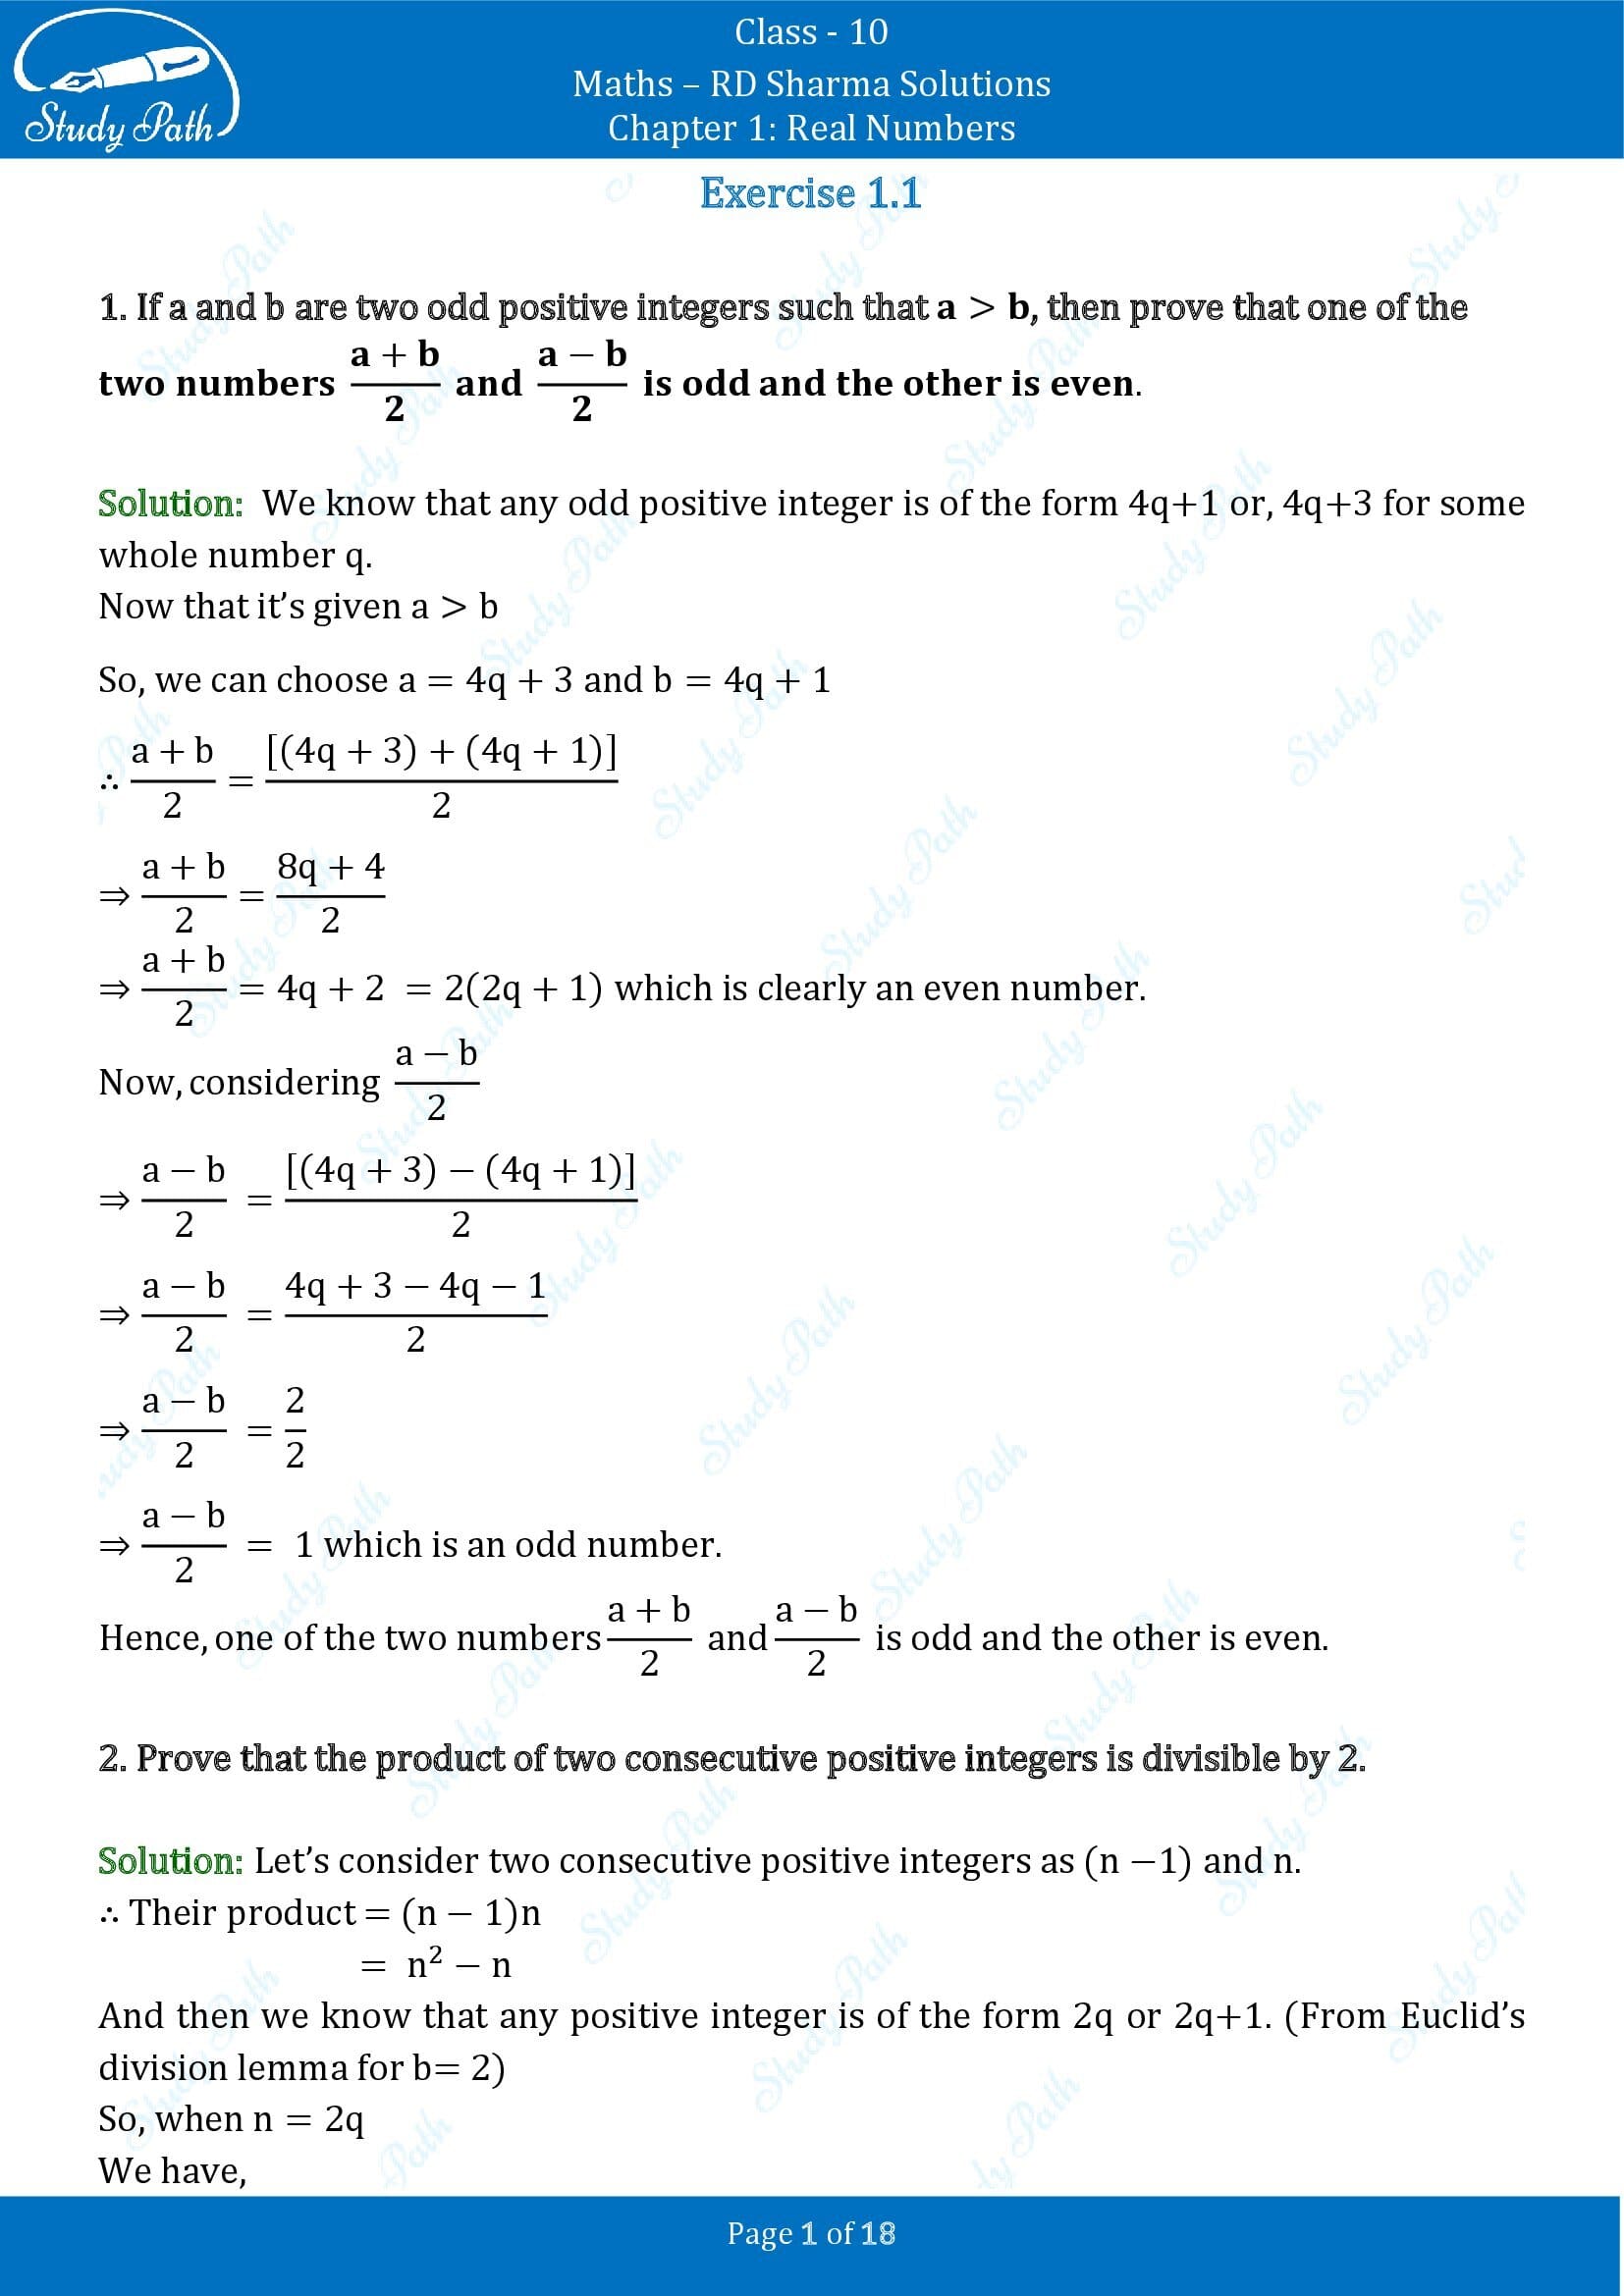 RD Sharma Solutions Class 10 Chapter 1 Real Numbers Exercise 1.1 00001